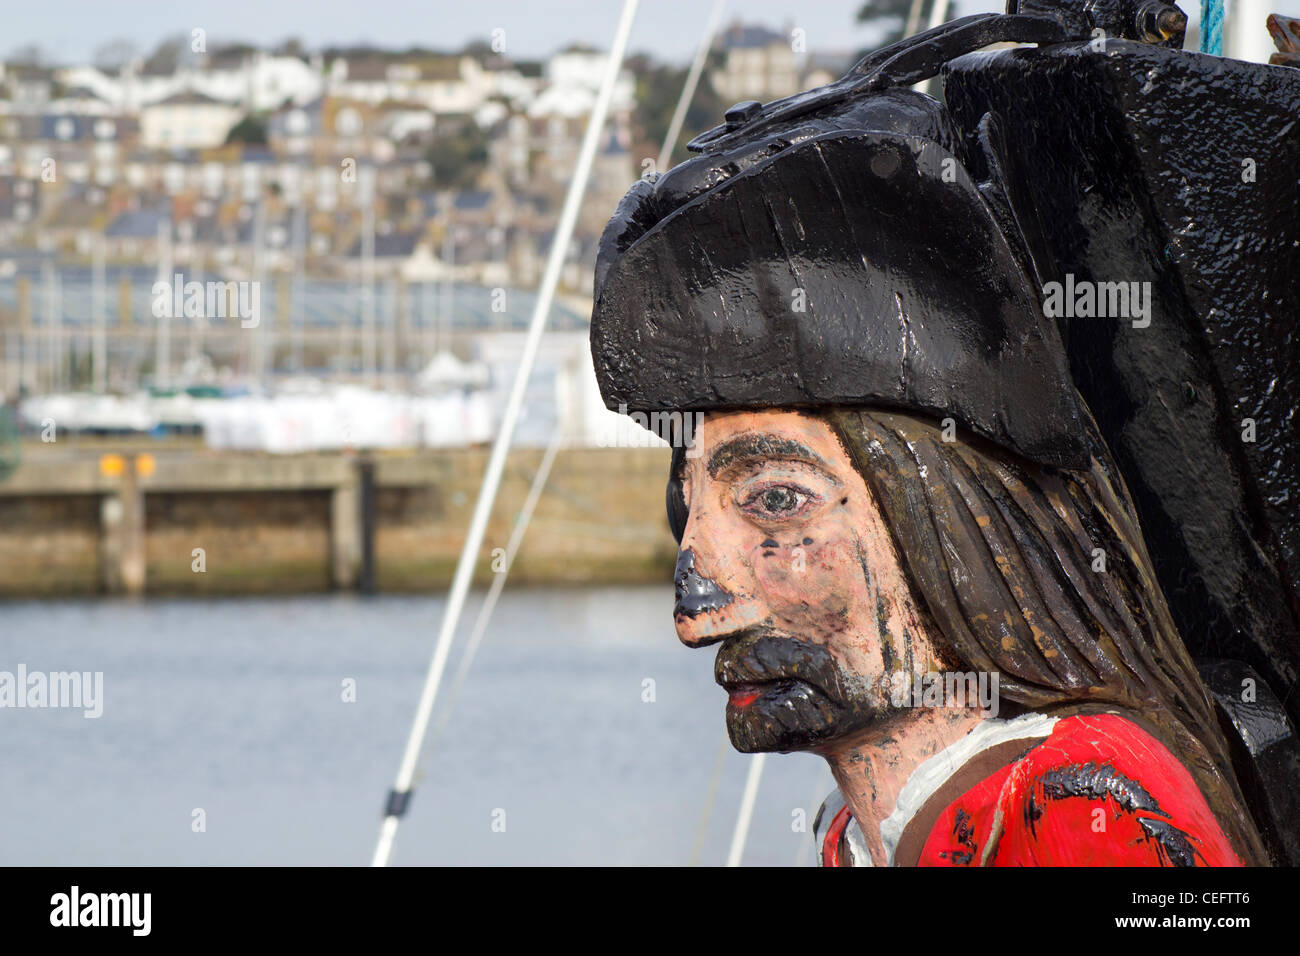 Pirate figurehead on the Bag O' Rags Pirate shop boat in Penzance harbour, Cornwall UK. Stock Photo